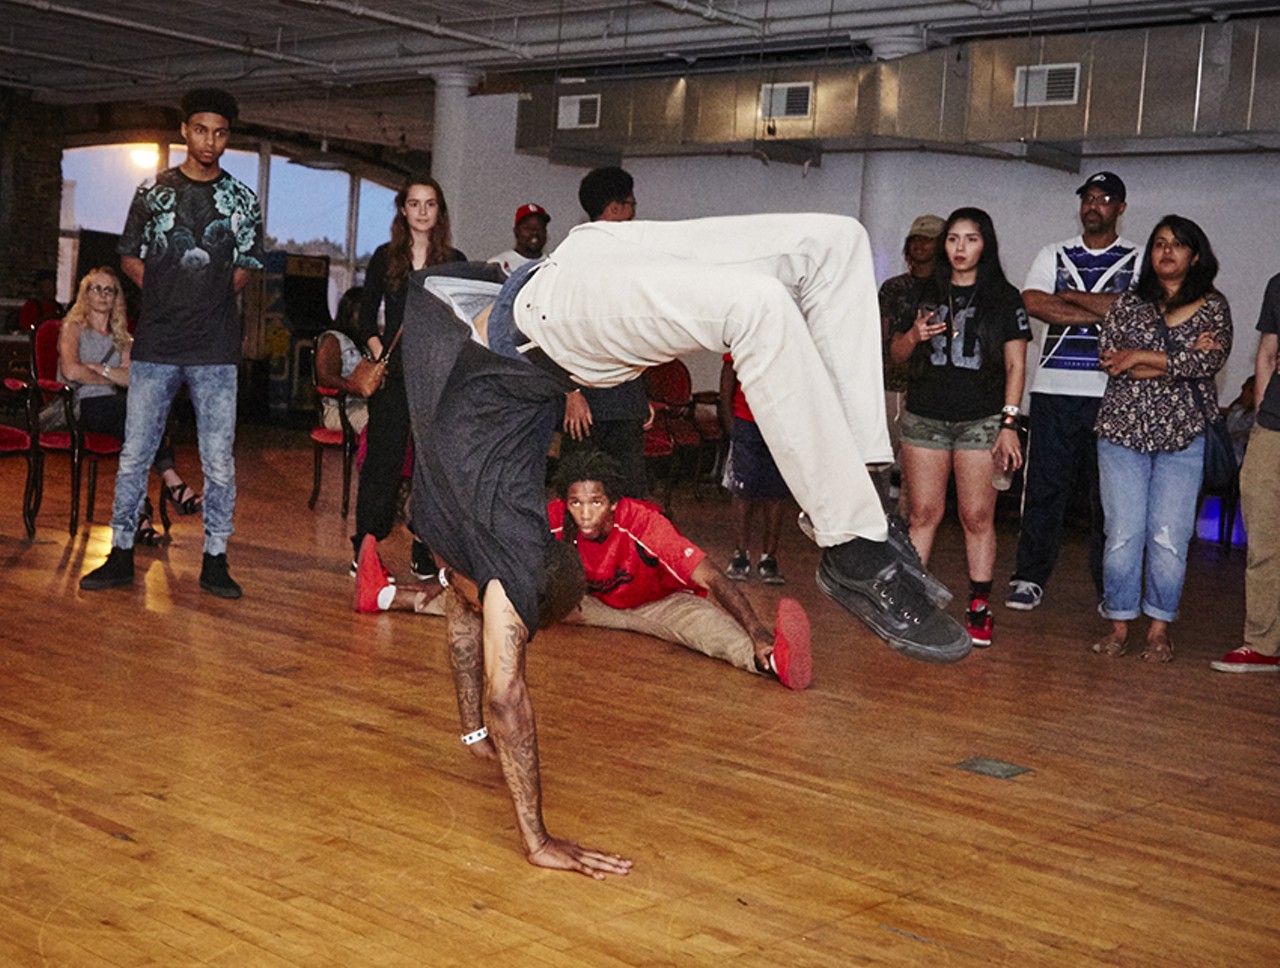 Check out this early round in the break dance competition.